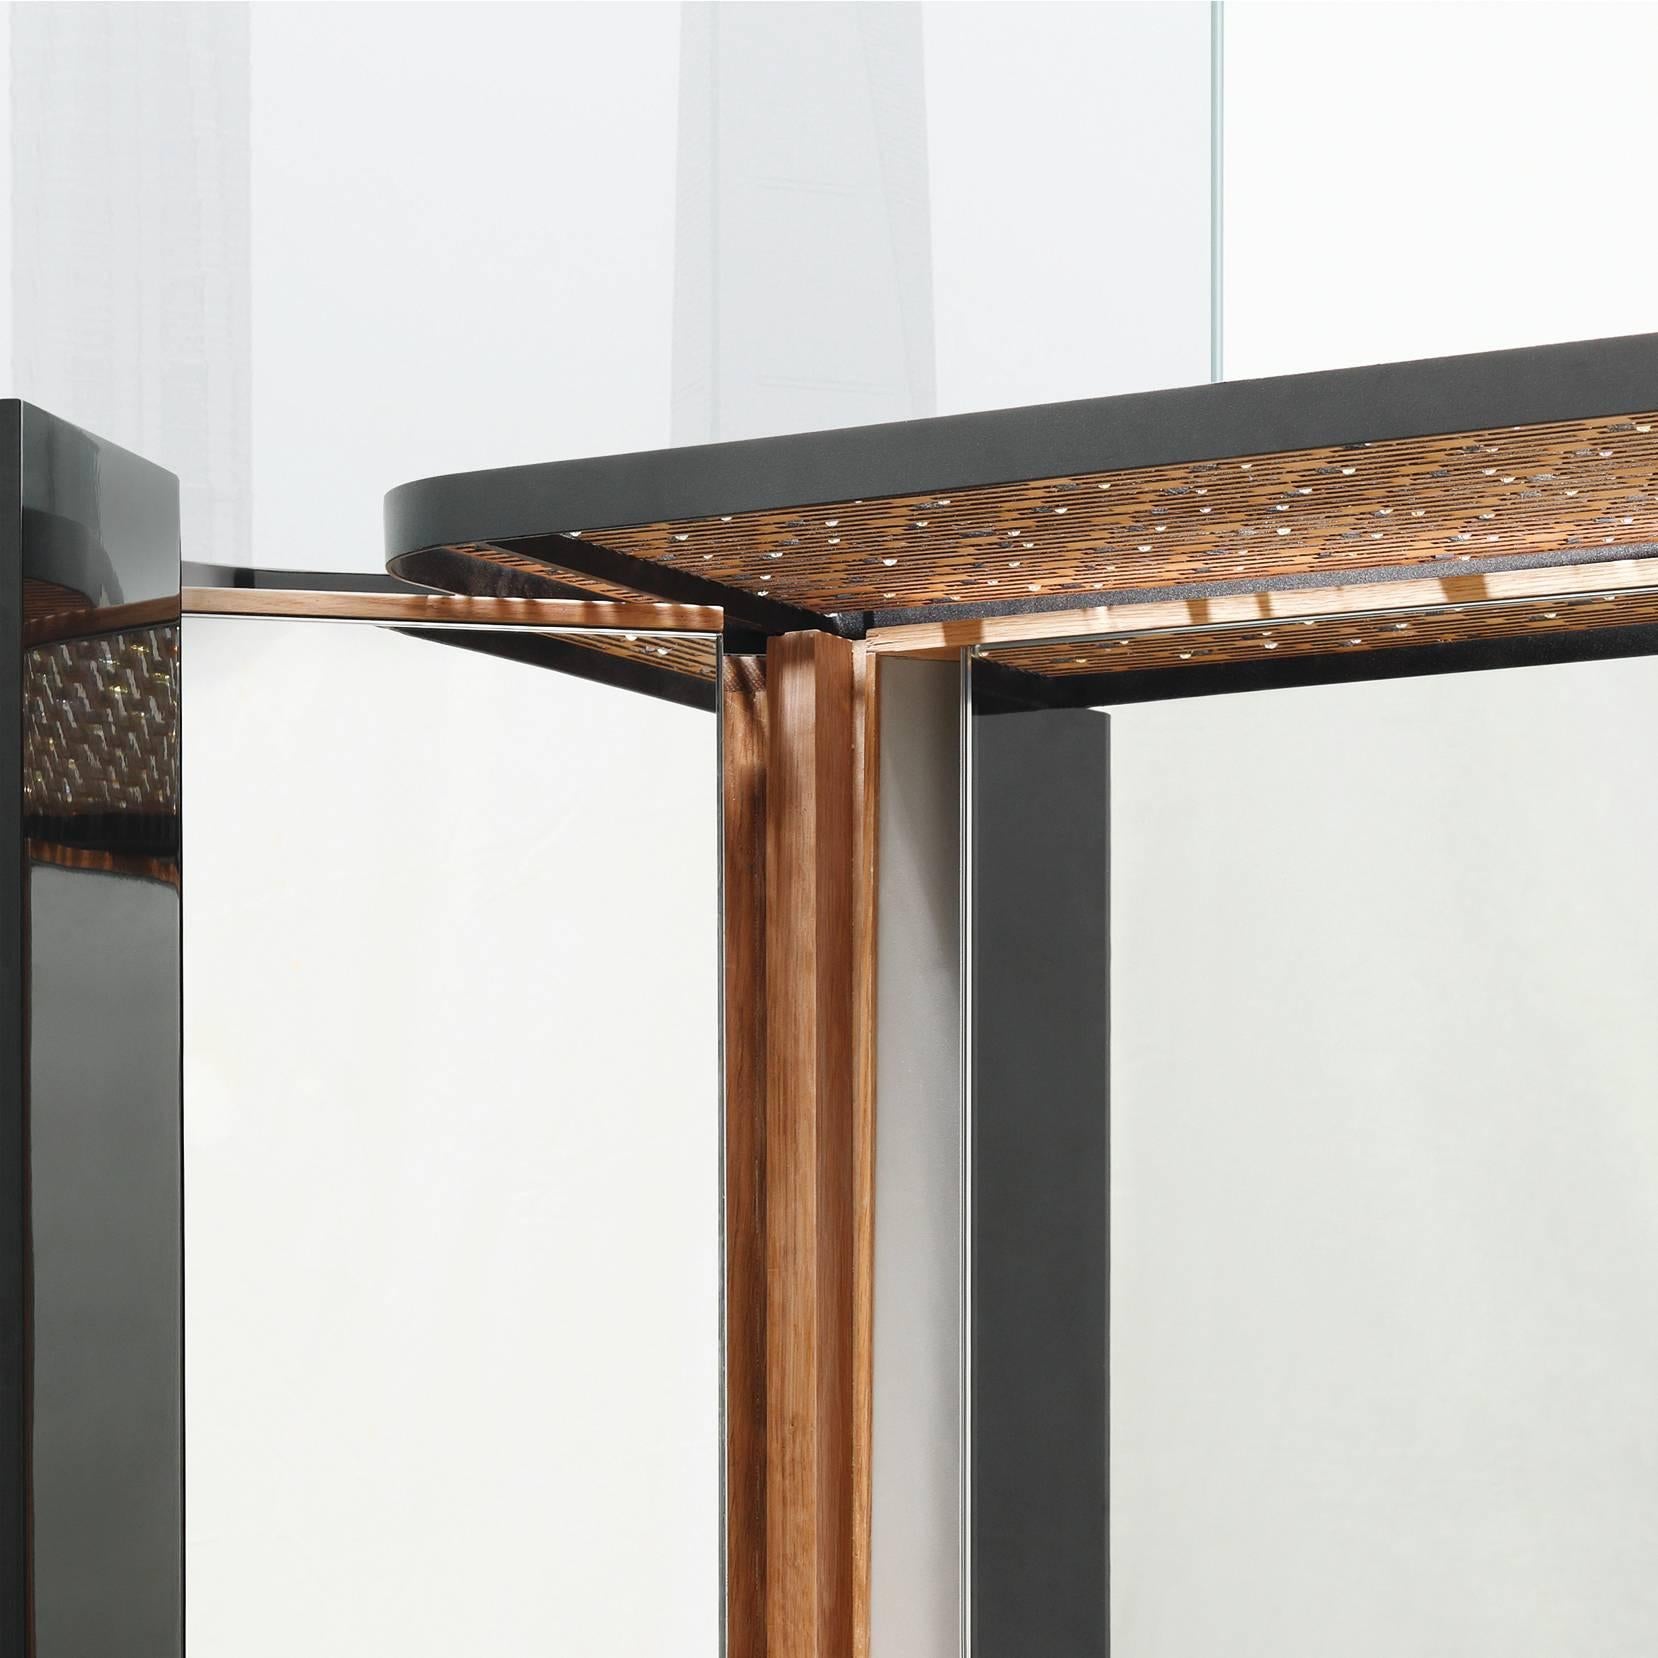 Aluminum Neri & Hu Dressing Table 'The Narcissist' Swarovski Crystals and Oak by BD For Sale